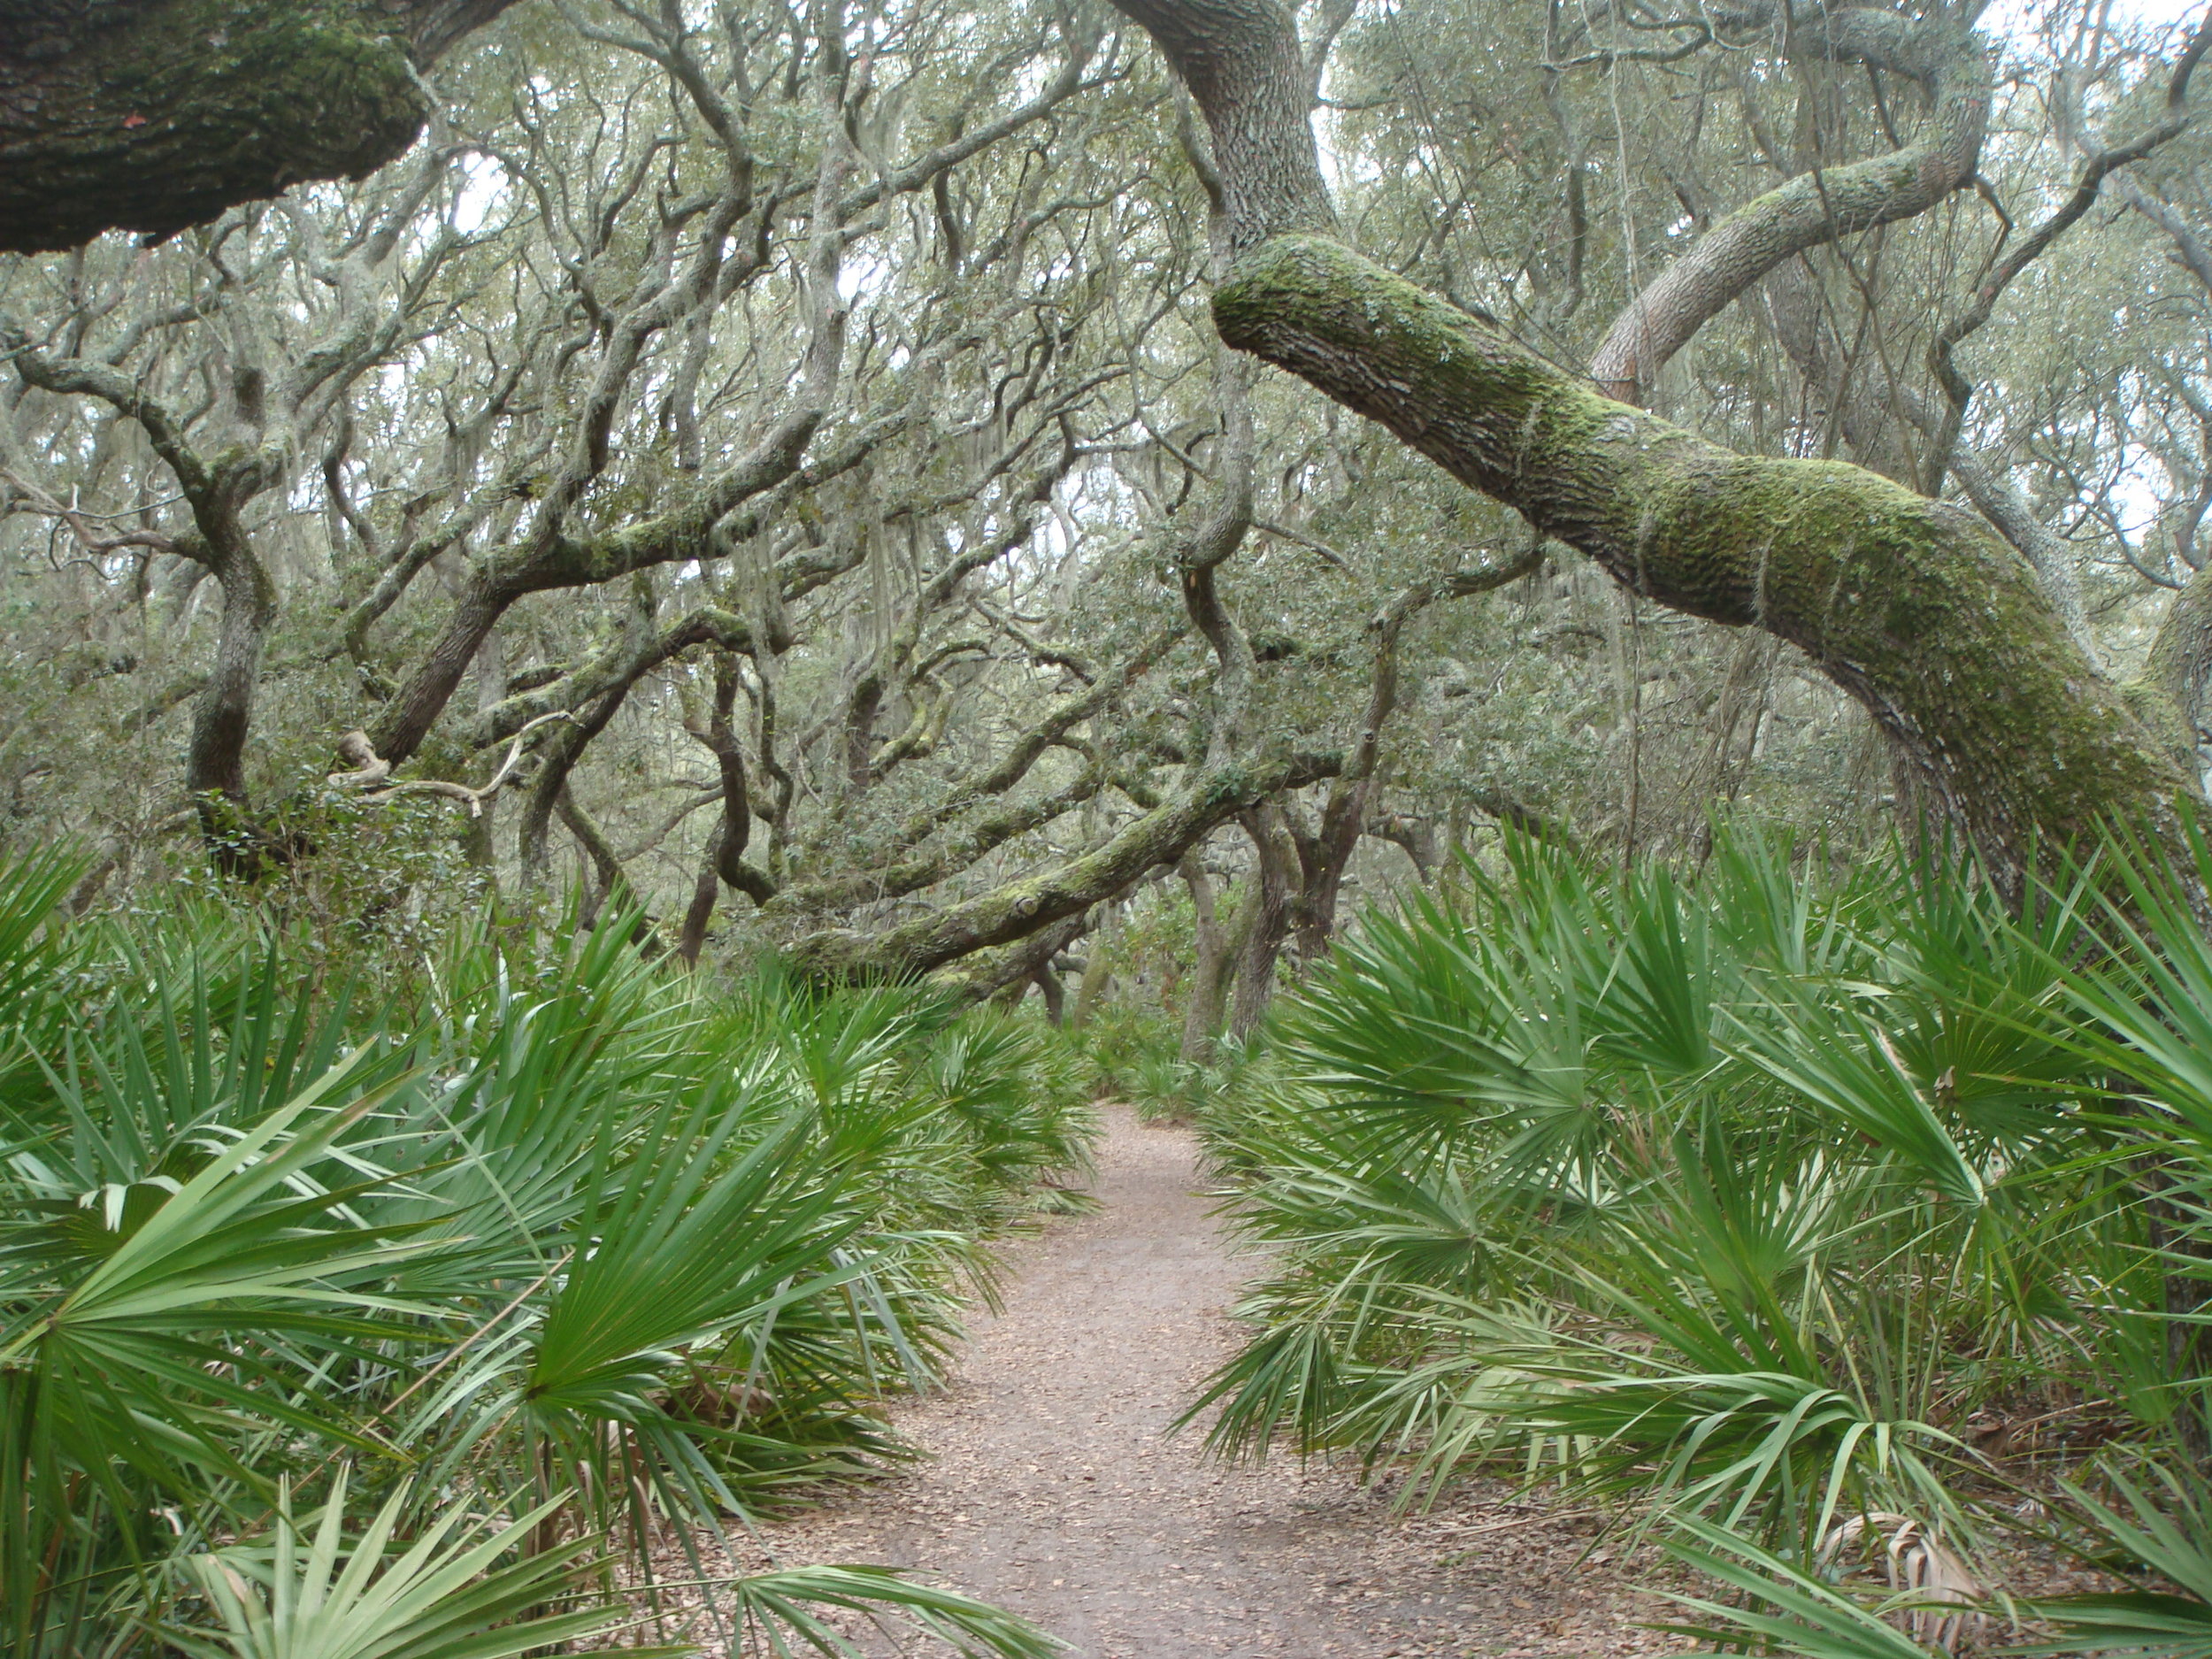 Cumberland Island includes 10,000 acres of wilderness offering many hiking opportunities.